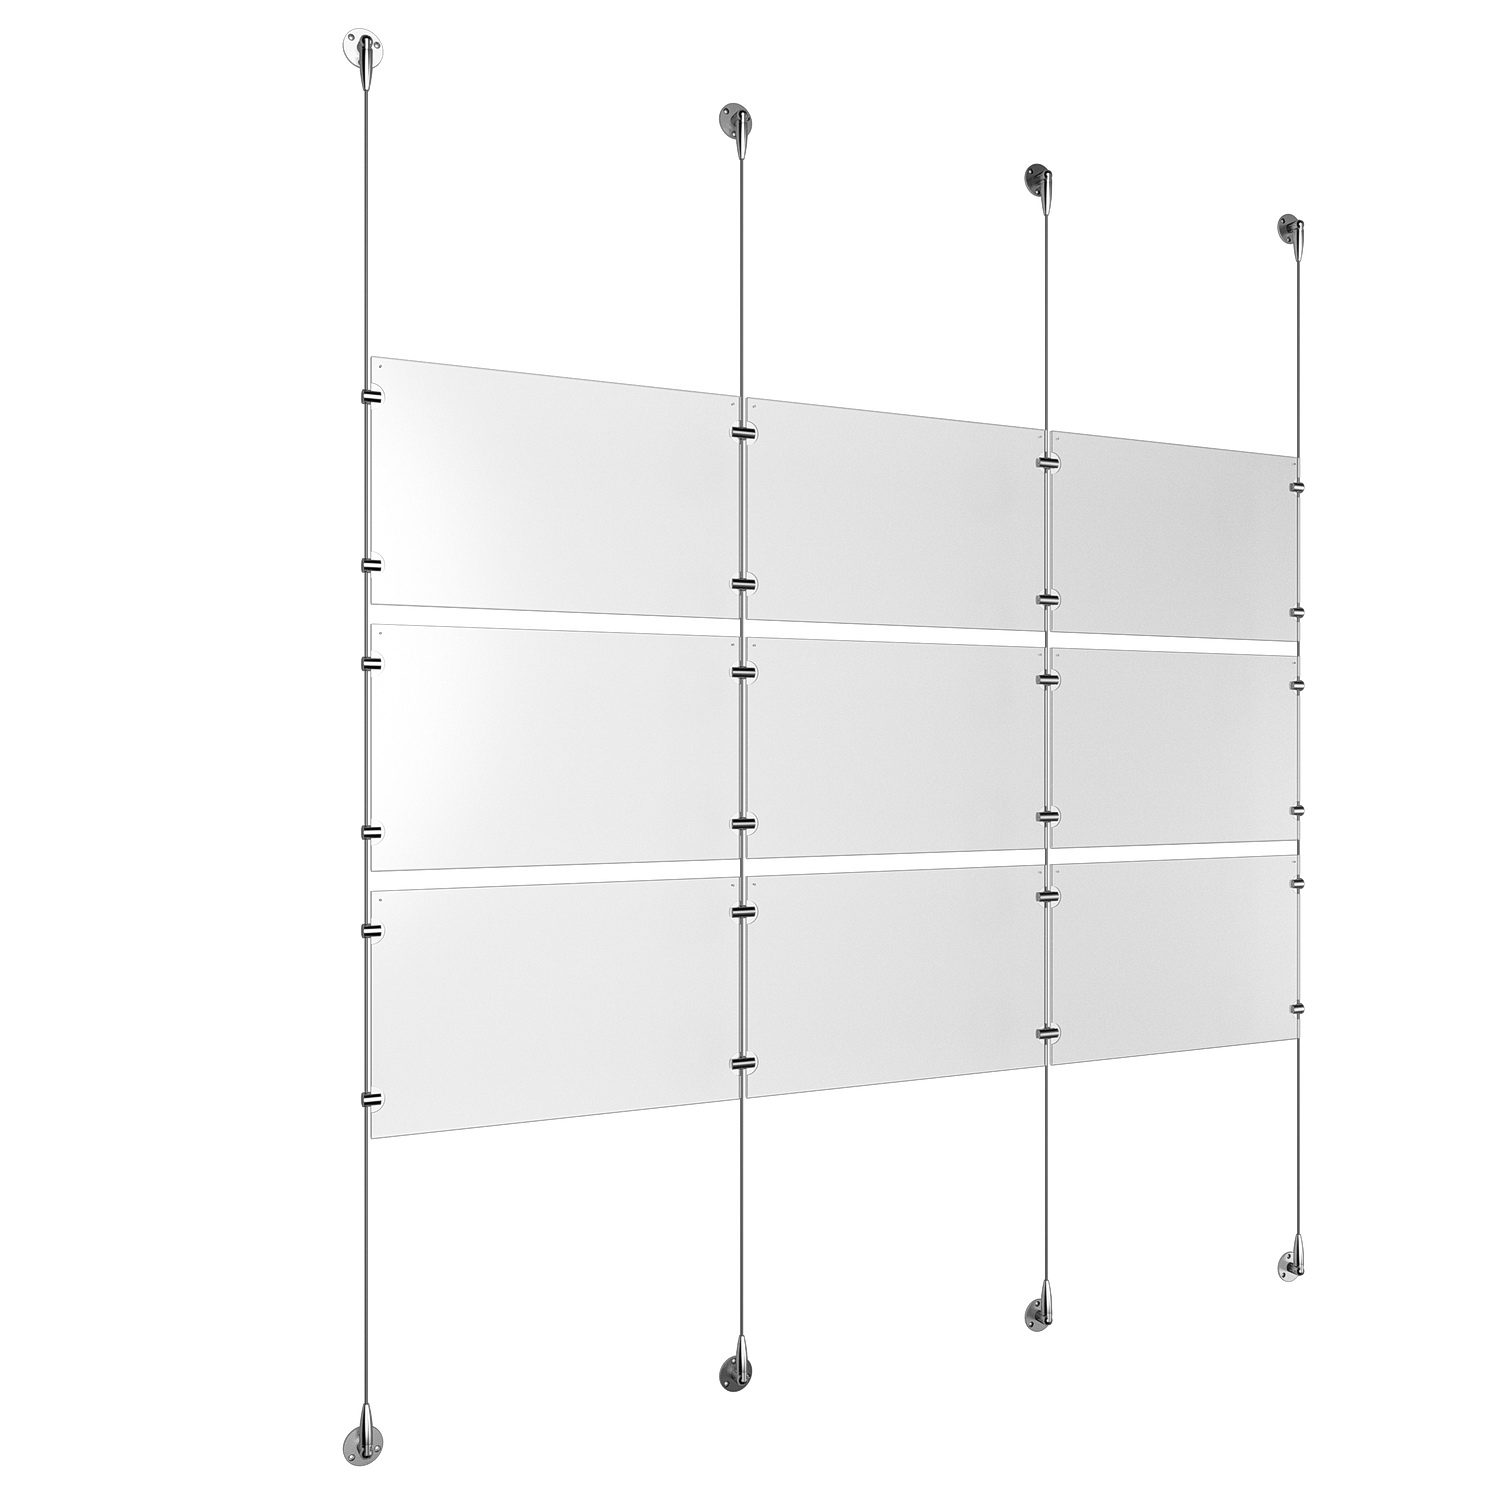 (9) 17'' Width x 11'' Height Clear Acrylic Frame & (4) Stainless Steel Satin Brushed Adjustable Angle Signature 1/8'' Cable Systems with (12) Single-Sided Panel Grippers (12) Double-Sided Panel Grippers